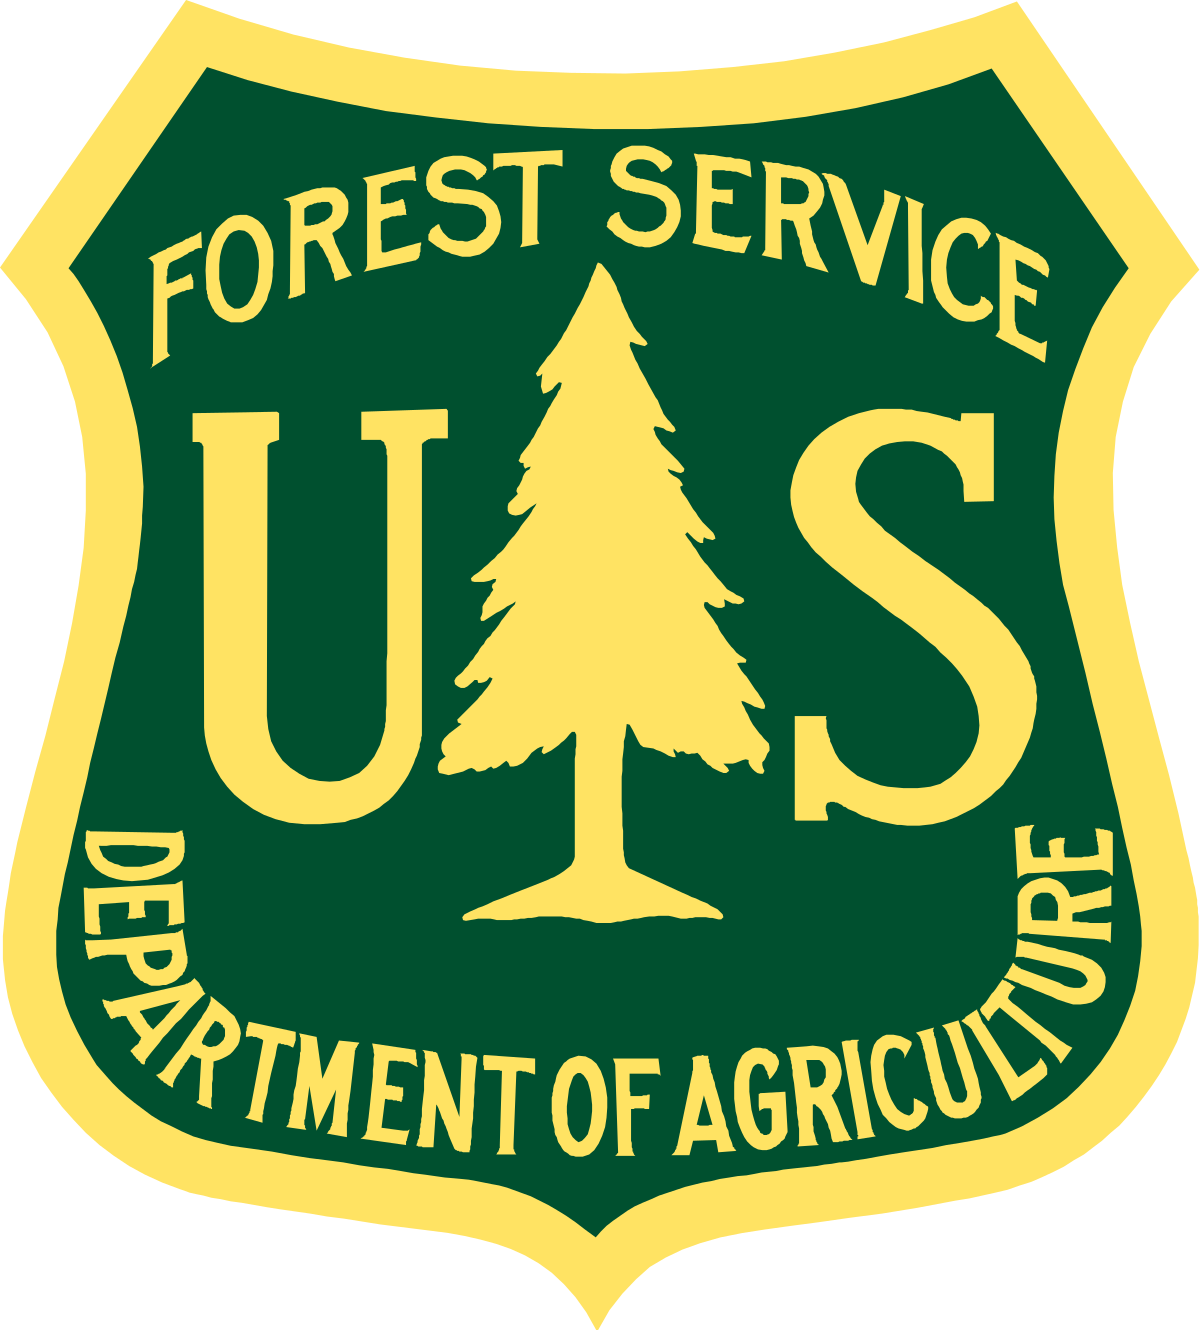 Logo_of_the_United_States_Forest_Service.png